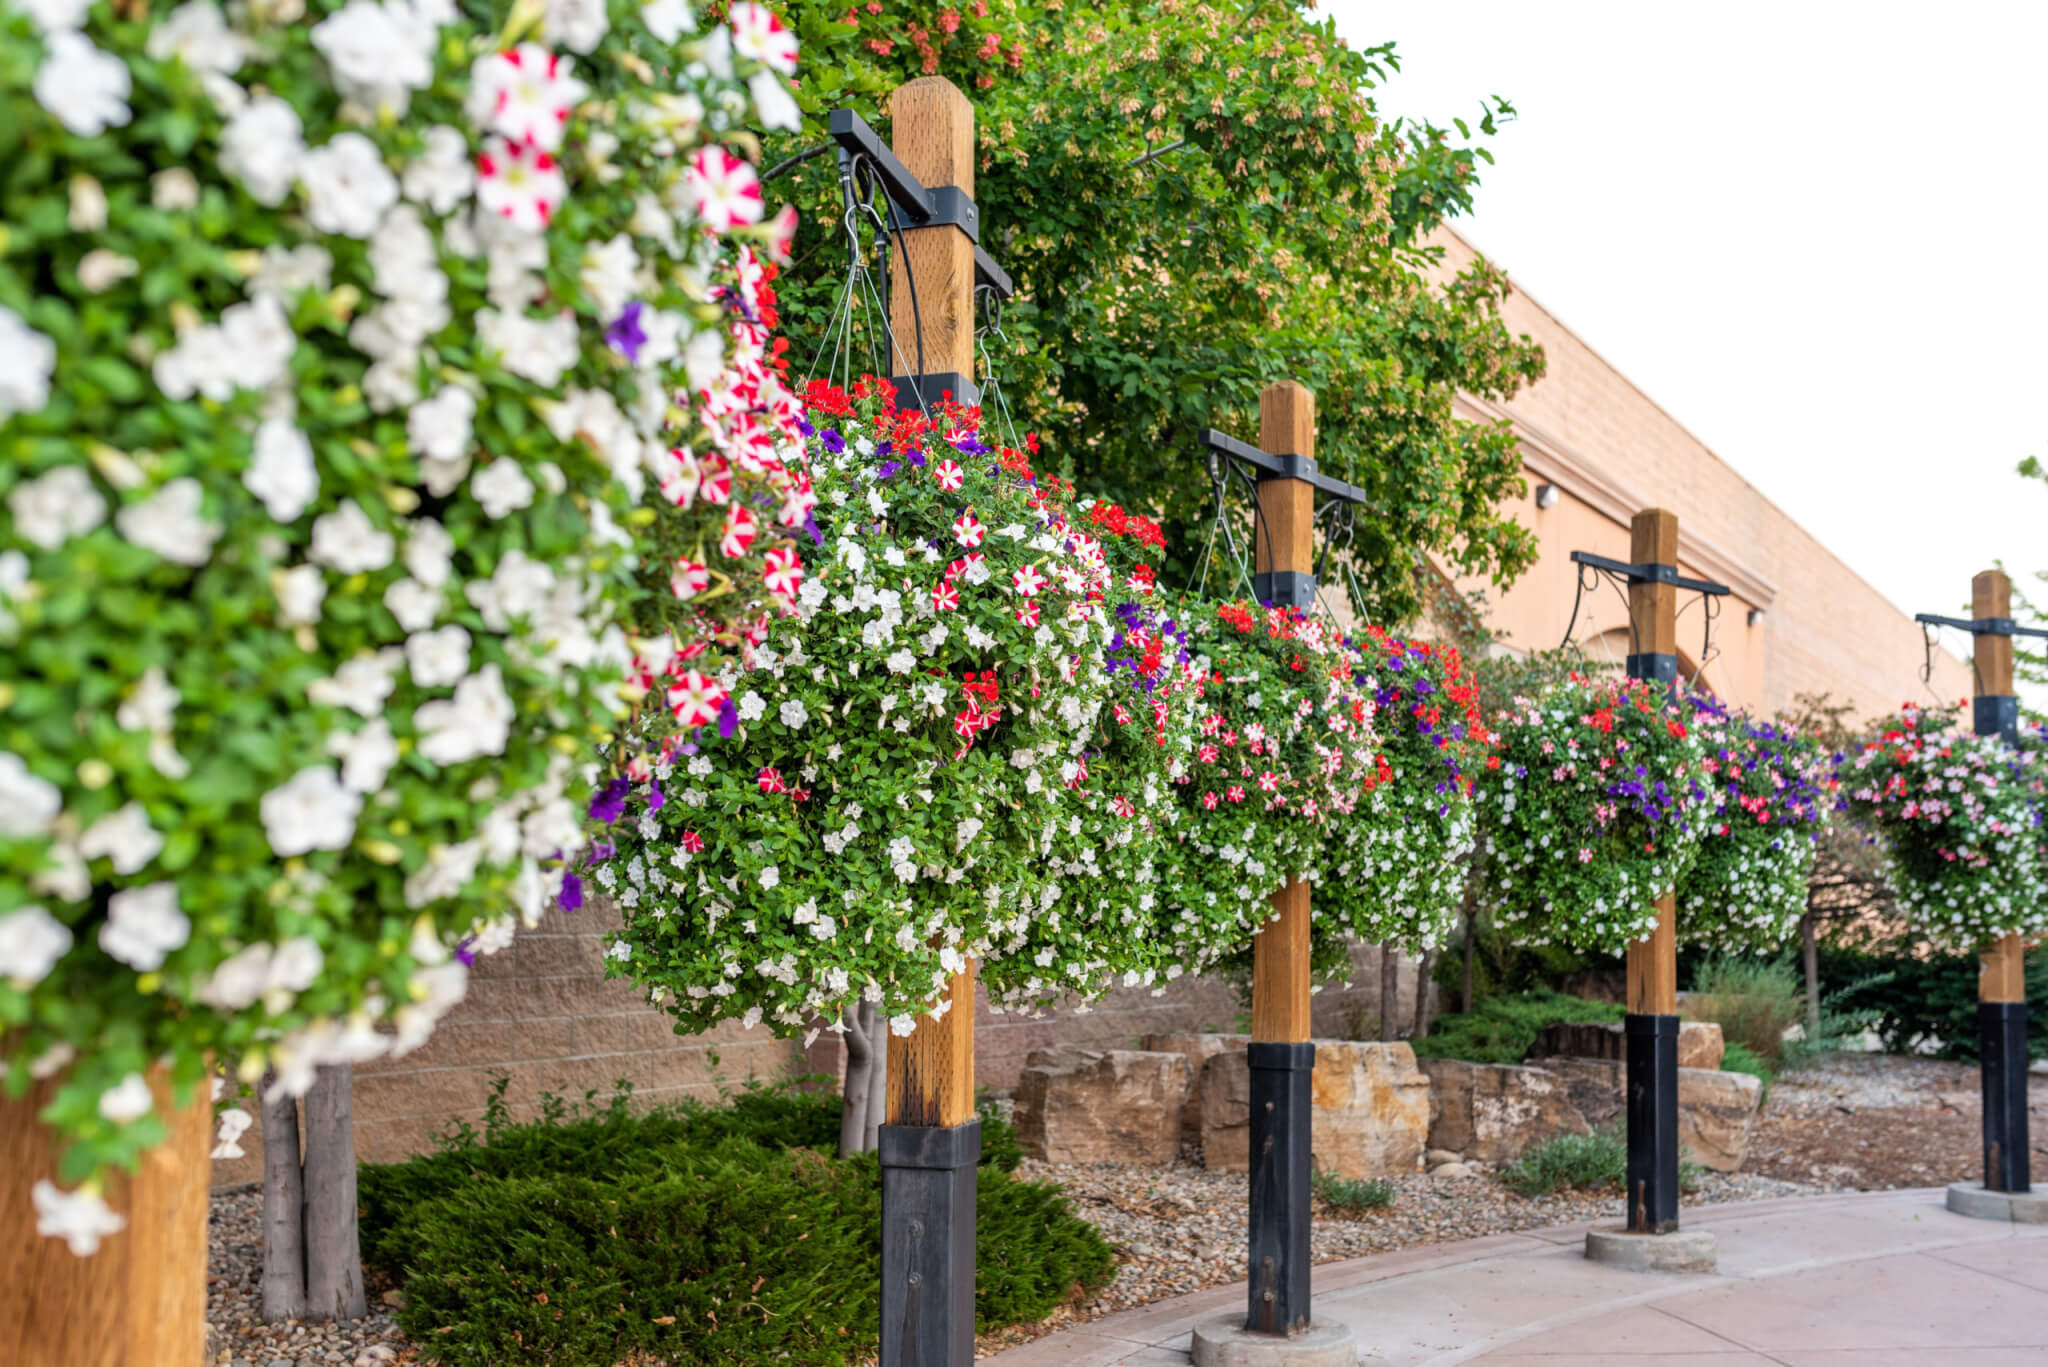 Hanging flower pots with colourful flower plants on side of the pathway